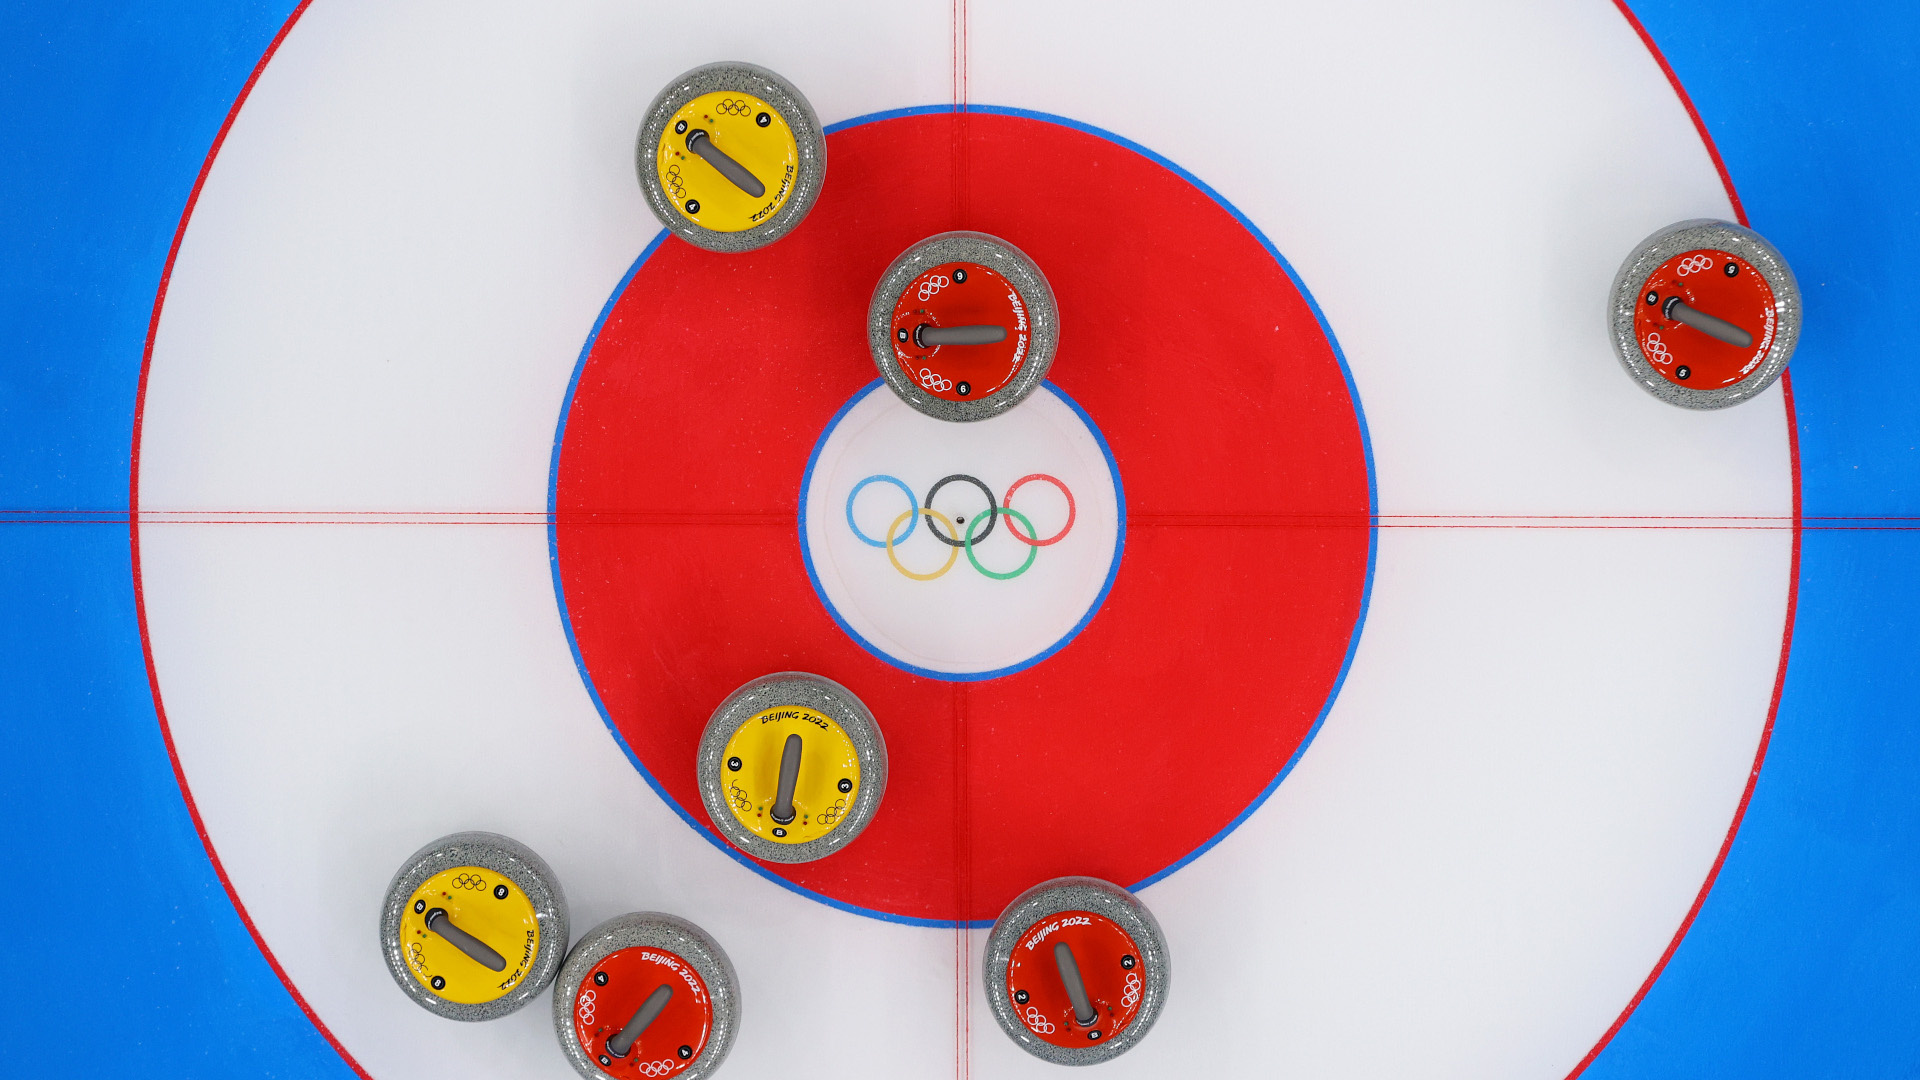 Curling: Official granite stones at the 2022 Beijing Winter Olympics, Competitive sport. 1920x1080 Full HD Wallpaper.